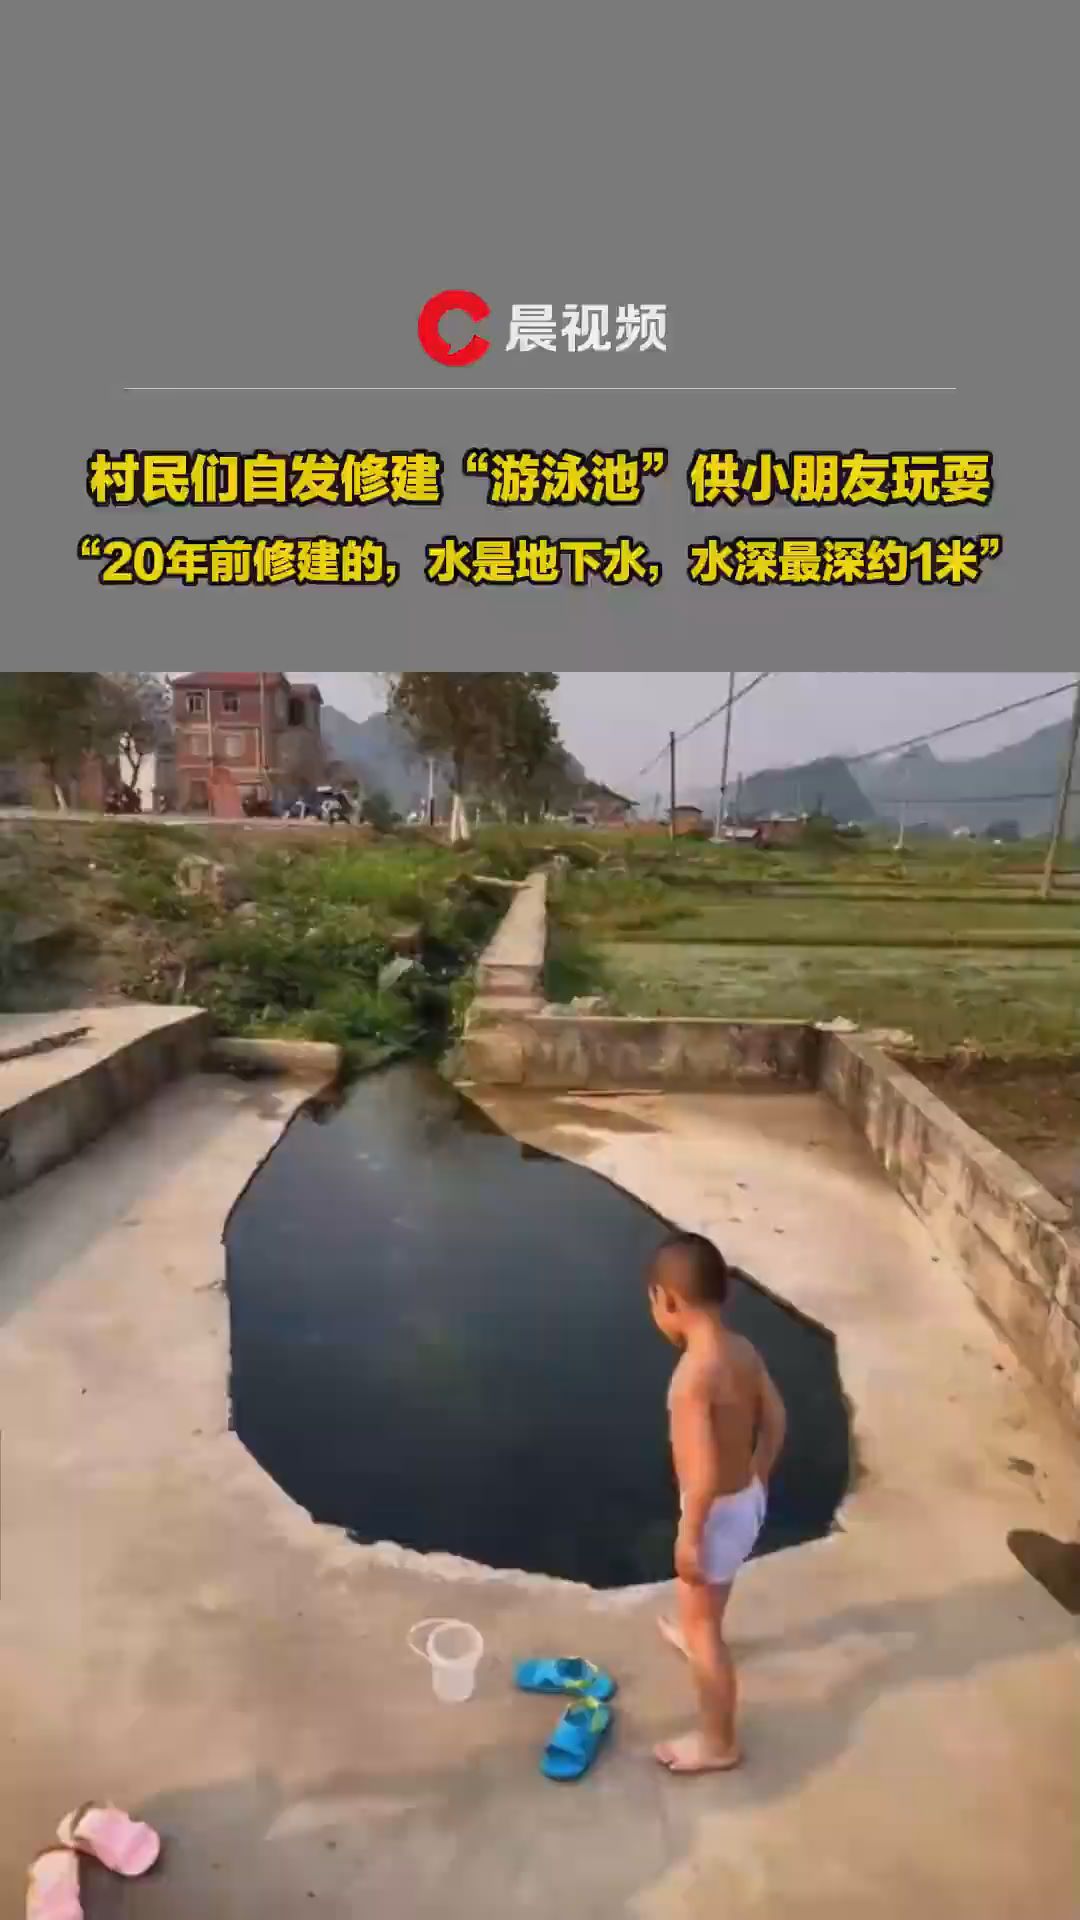  Villagers build swimming pools for children to play